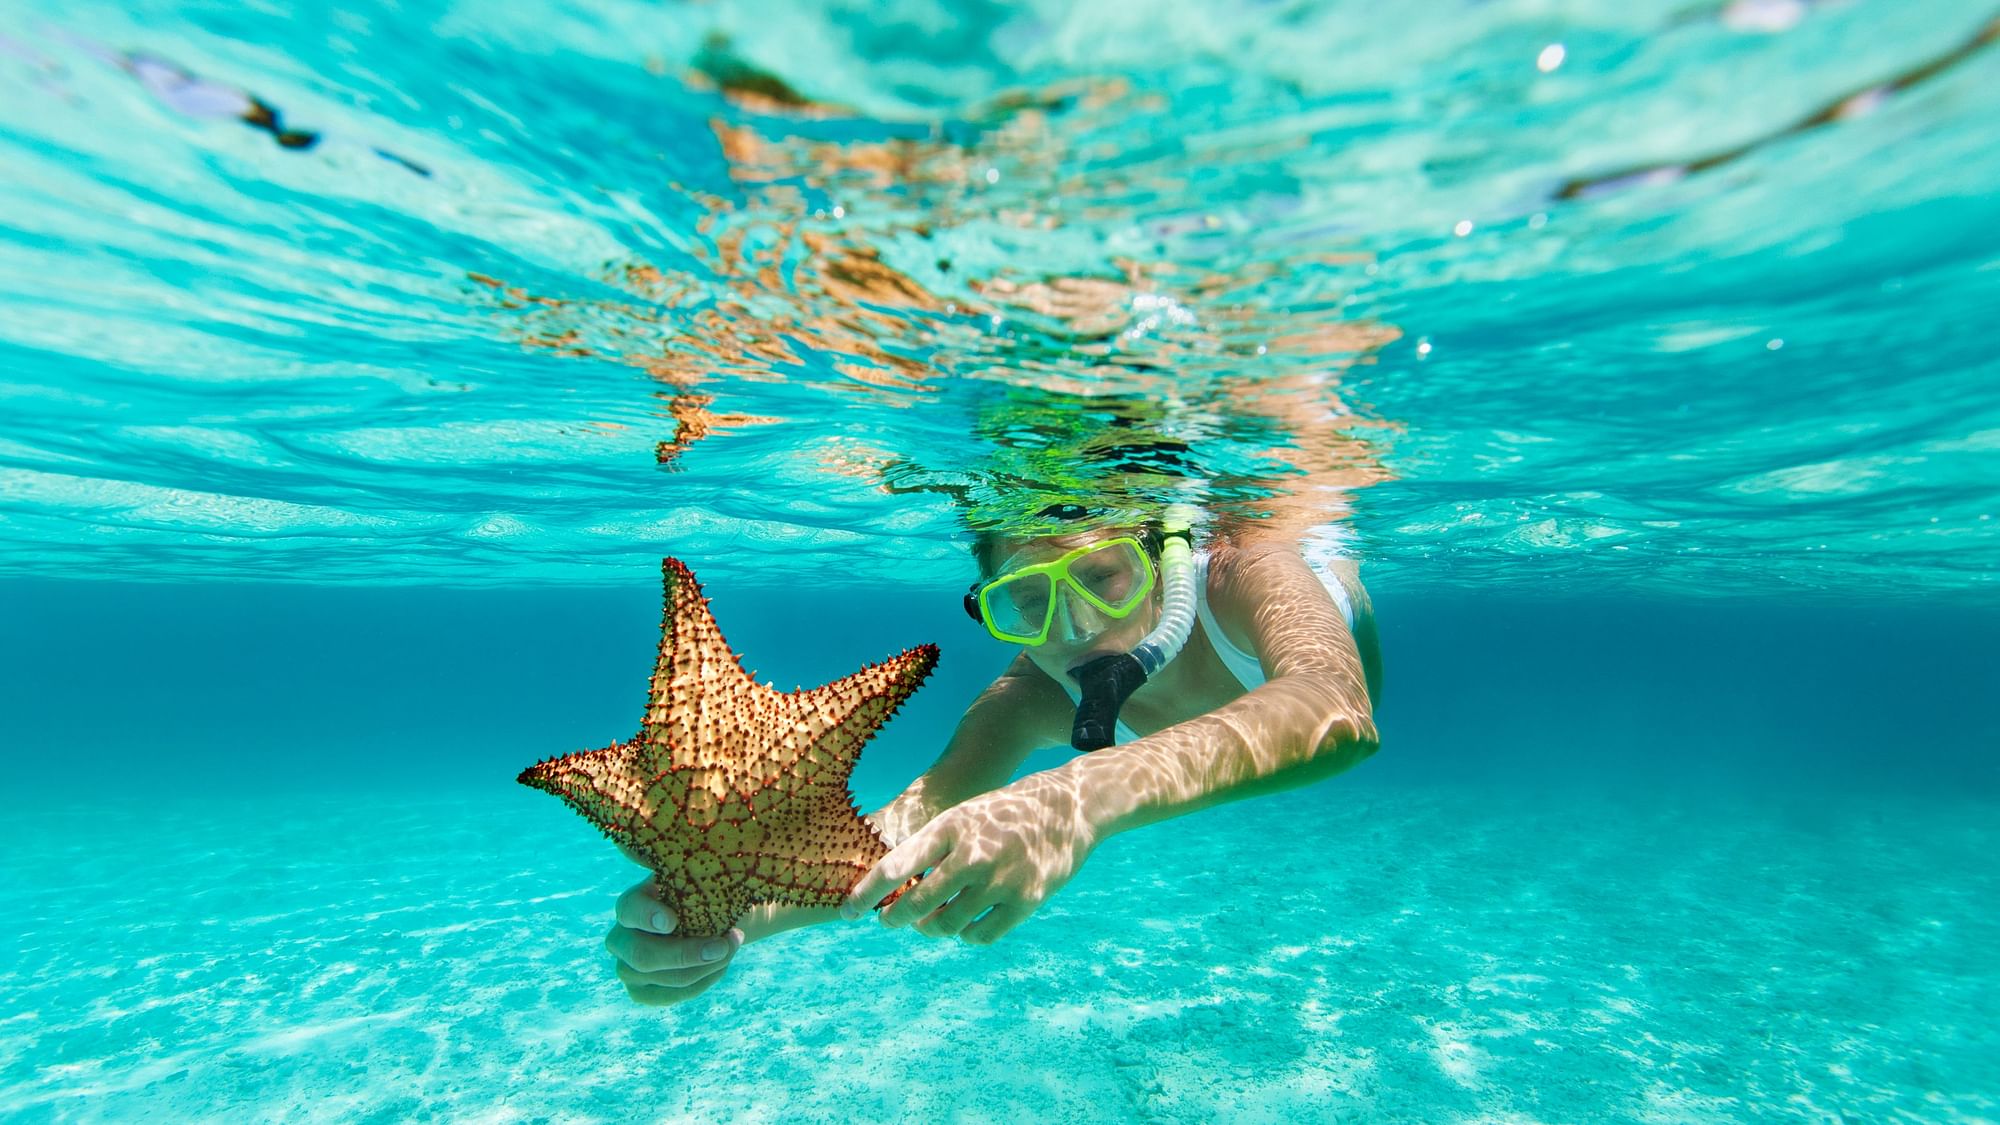 Snorkelling allows you to experience the mysterious marine life while being on top of the water.